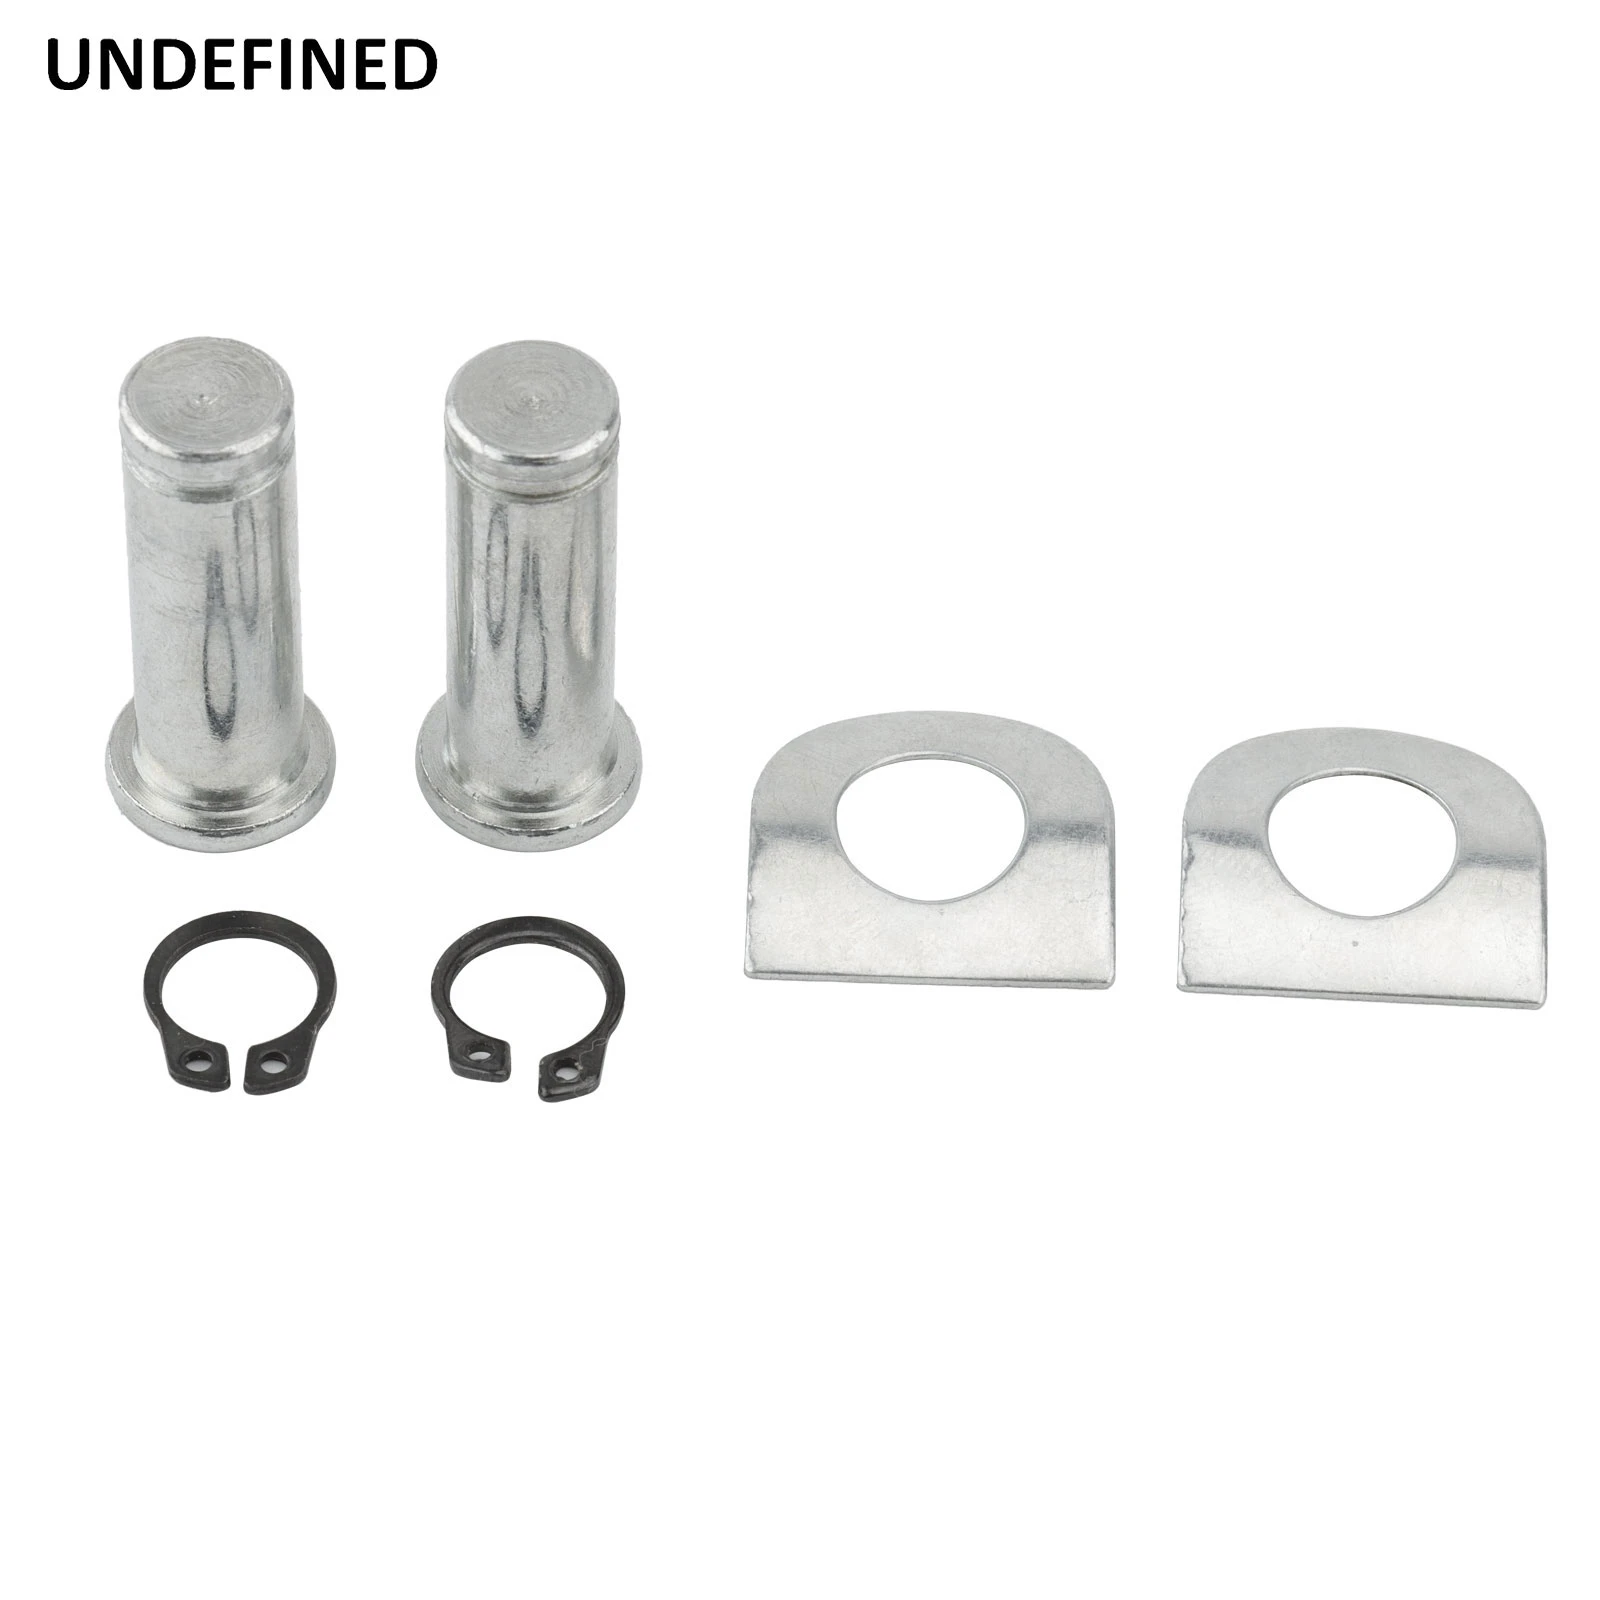 Foot Pegs Mount Kit Pins For Harley Dyna Softail Sportster V Rod